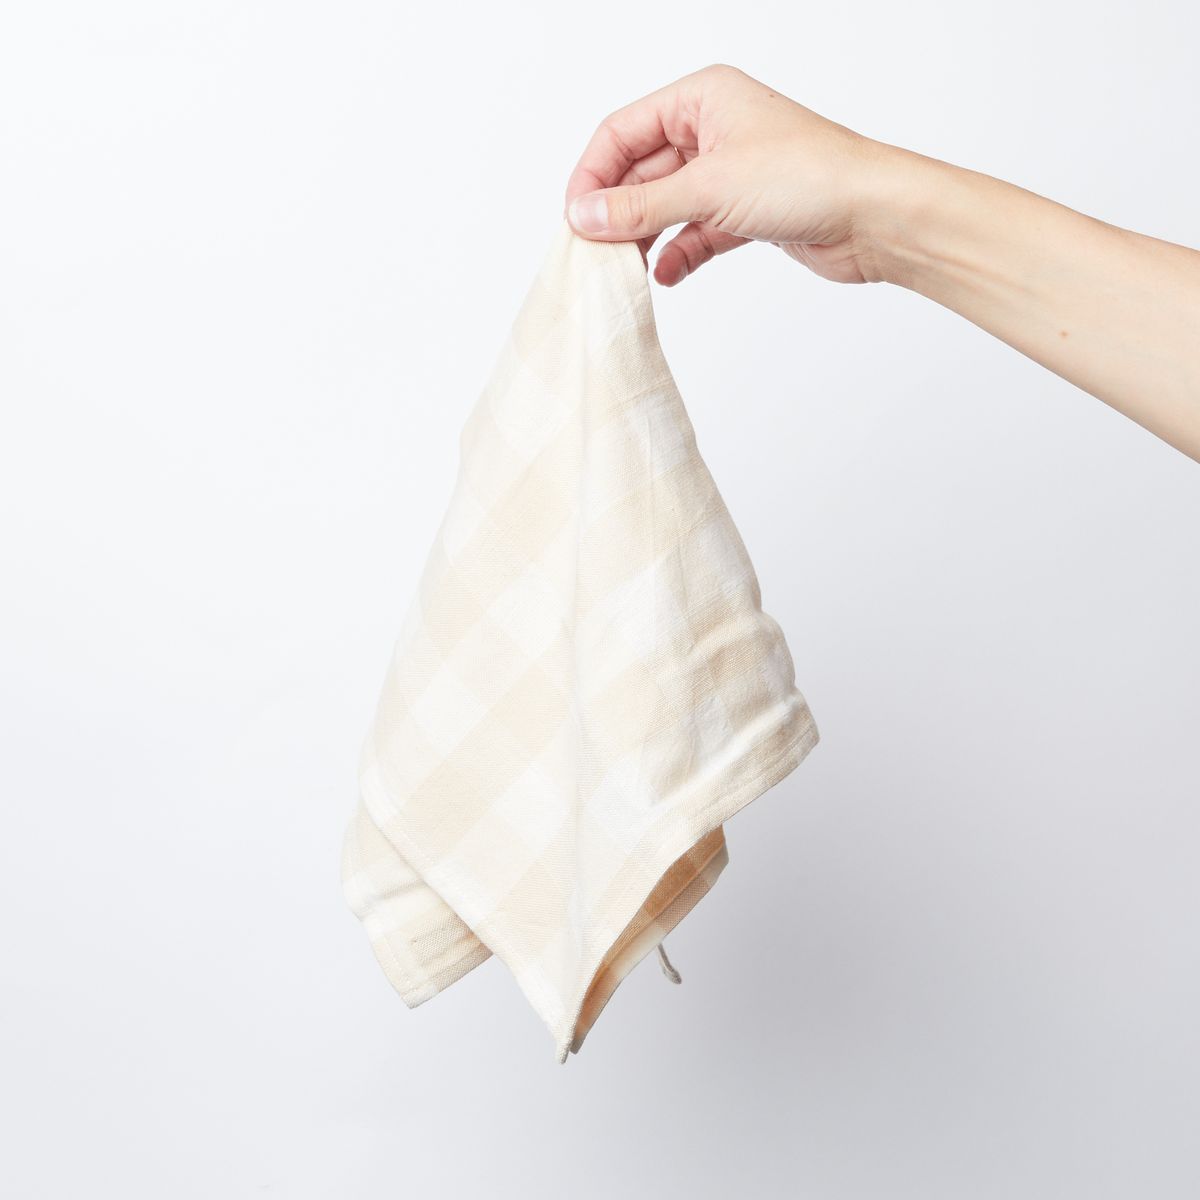 Hand holding a single cream and white gingham cotton napkin from the corner